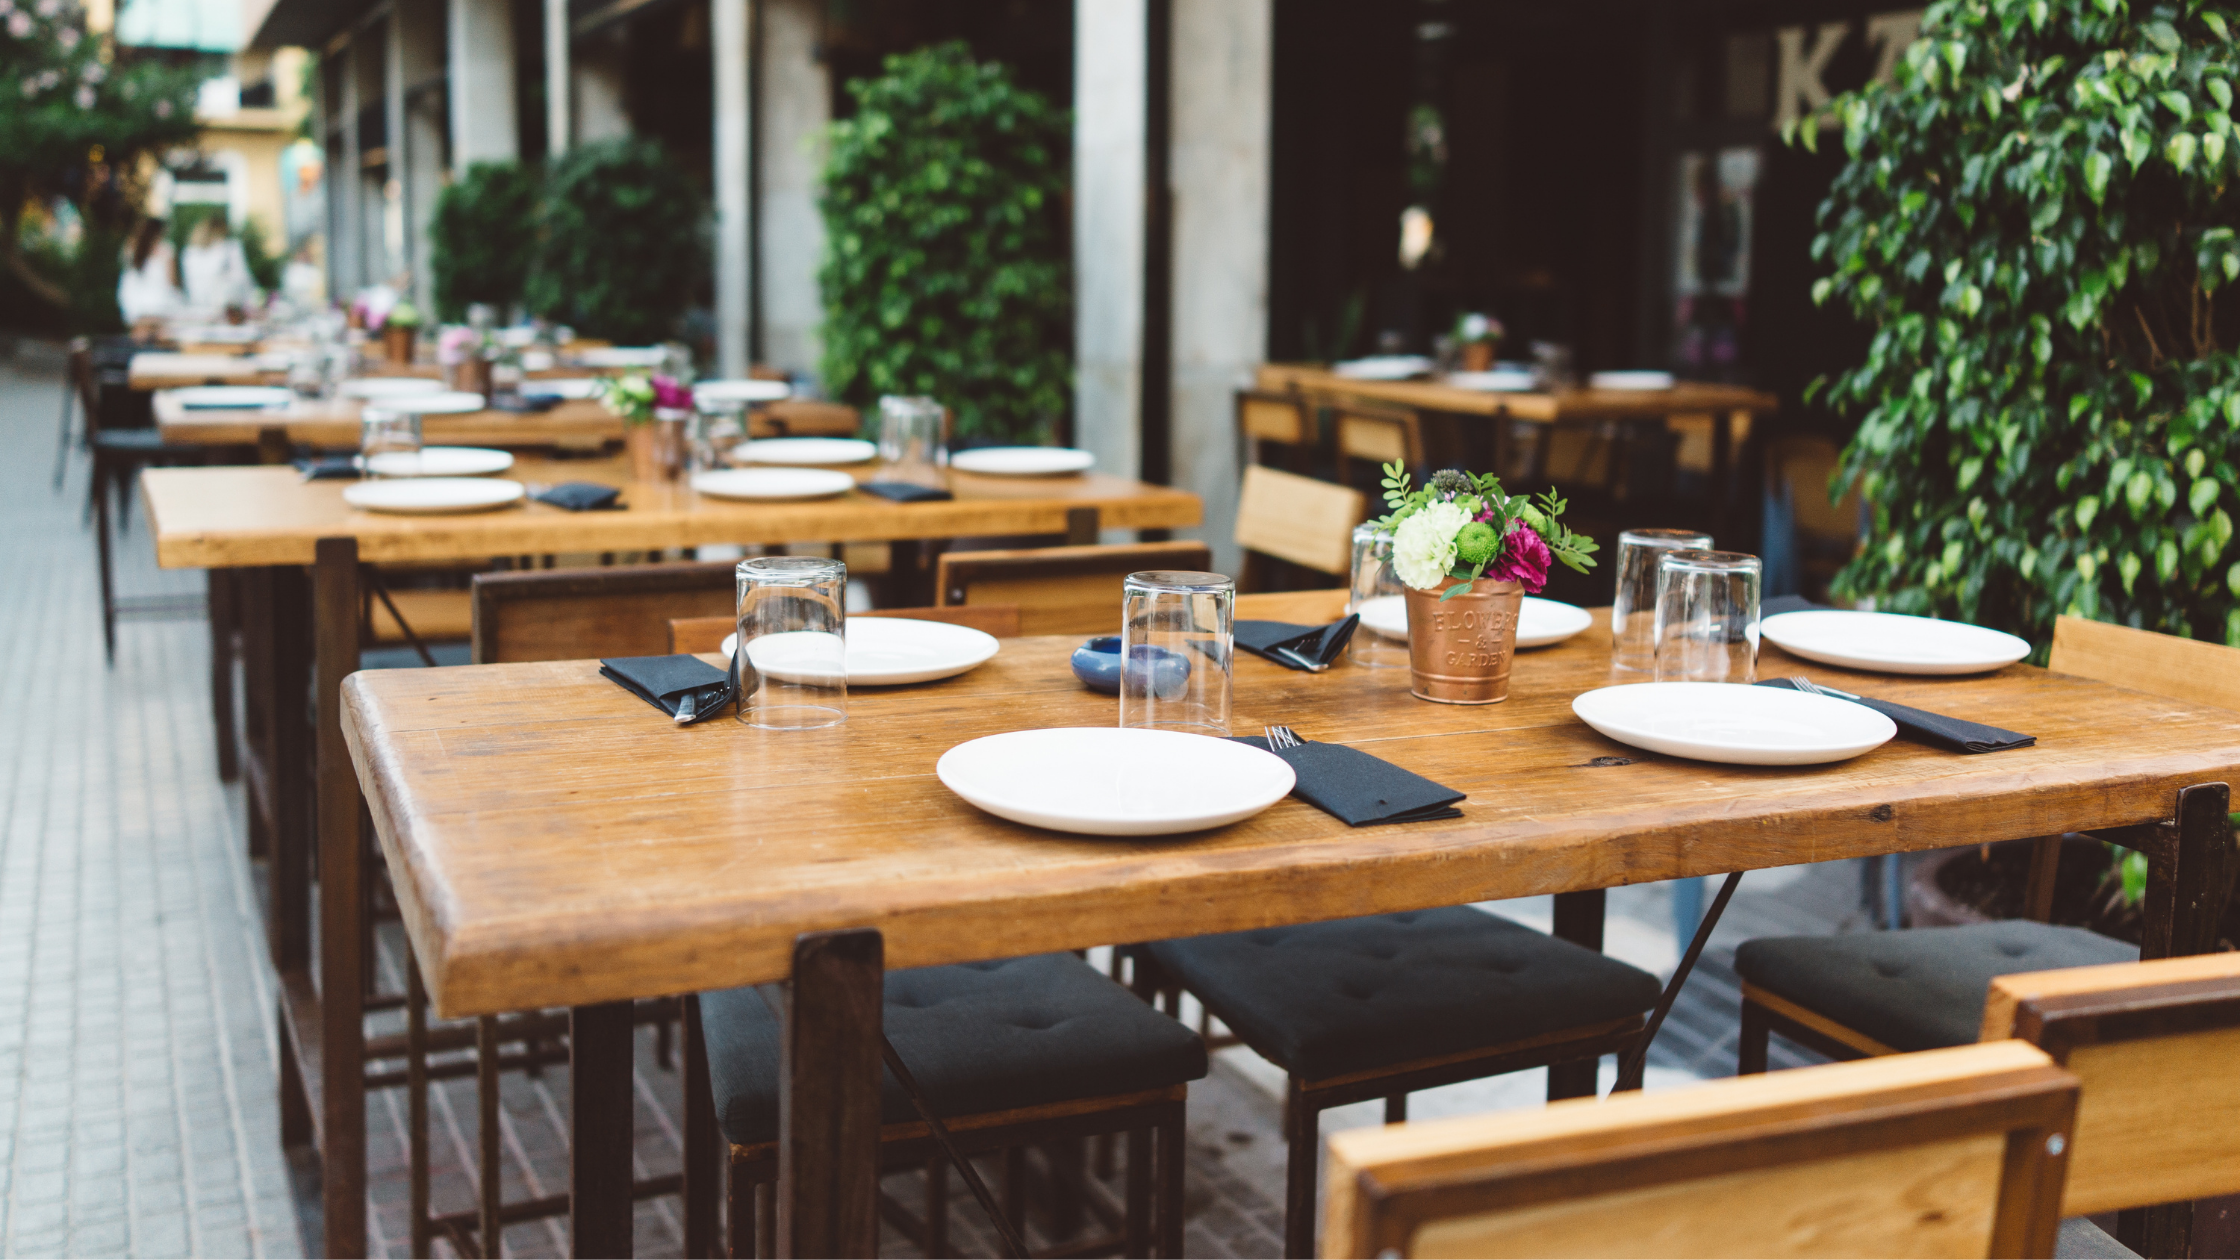 Should Your Restaurant Keep It’s Outdoor Seating This Winter?